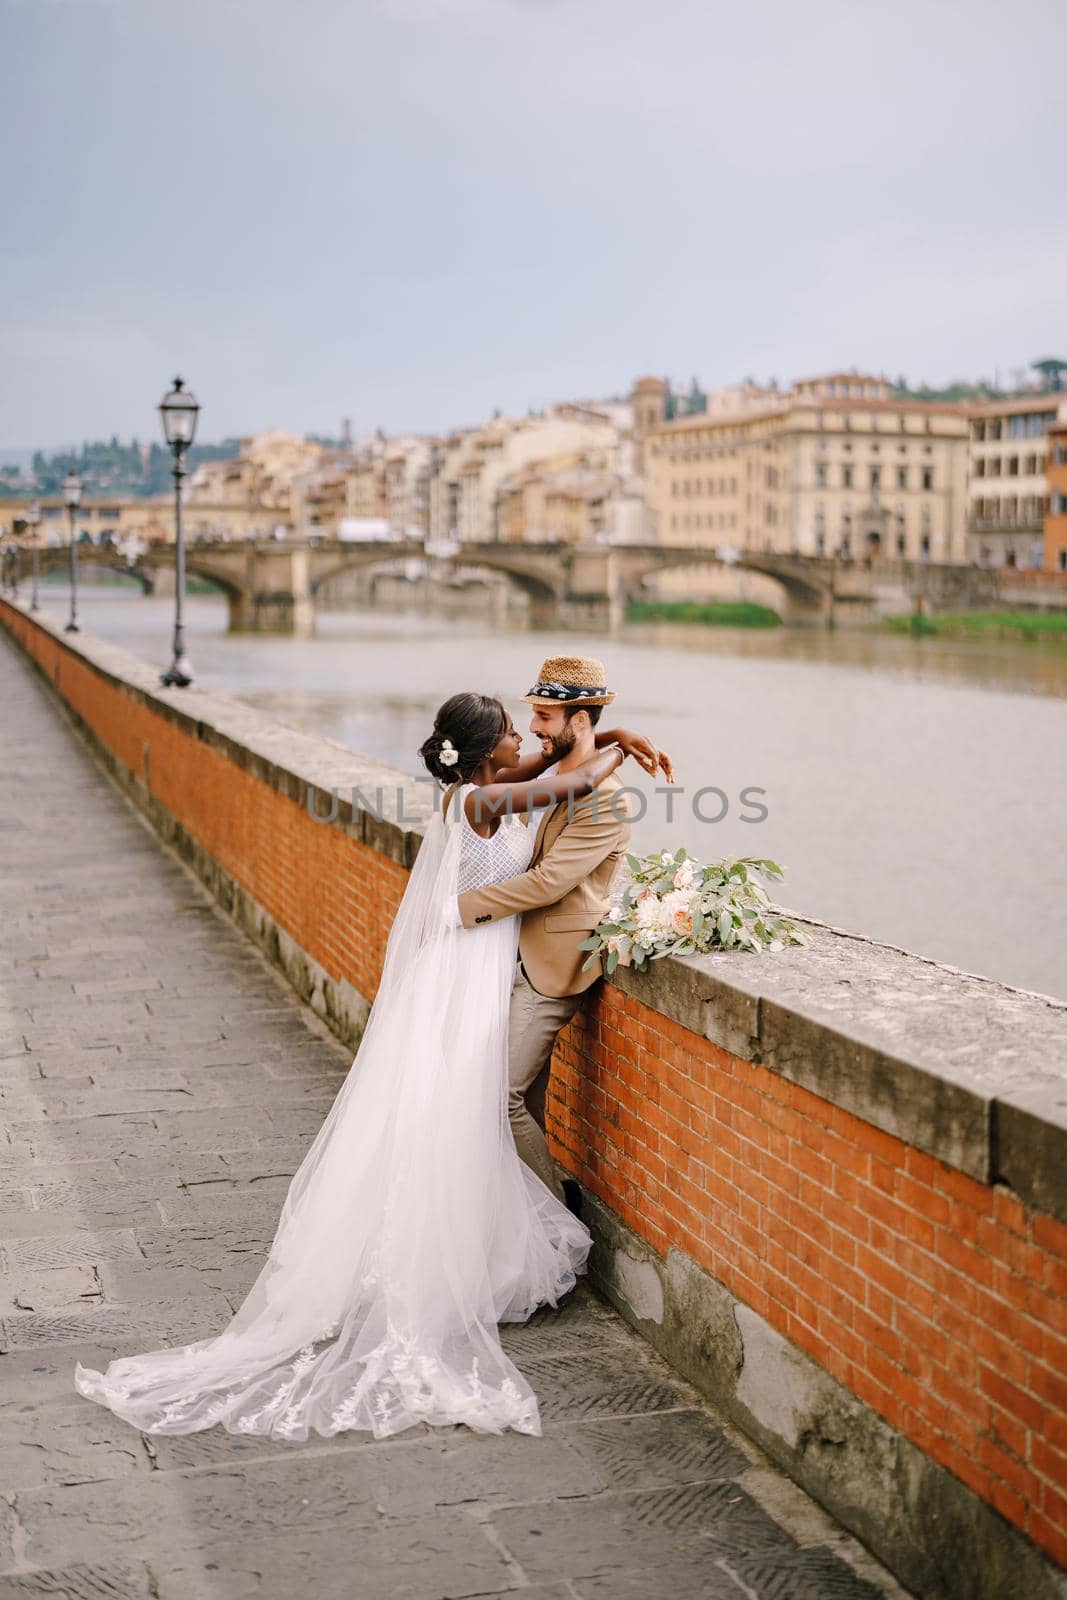 Mixed-race wedding couple. Wedding in Florence, Italy. African-American bride and Caucasian groom stand embracing on the embankment of the Arno River, overlooking the city and bridges. by Nadtochiy